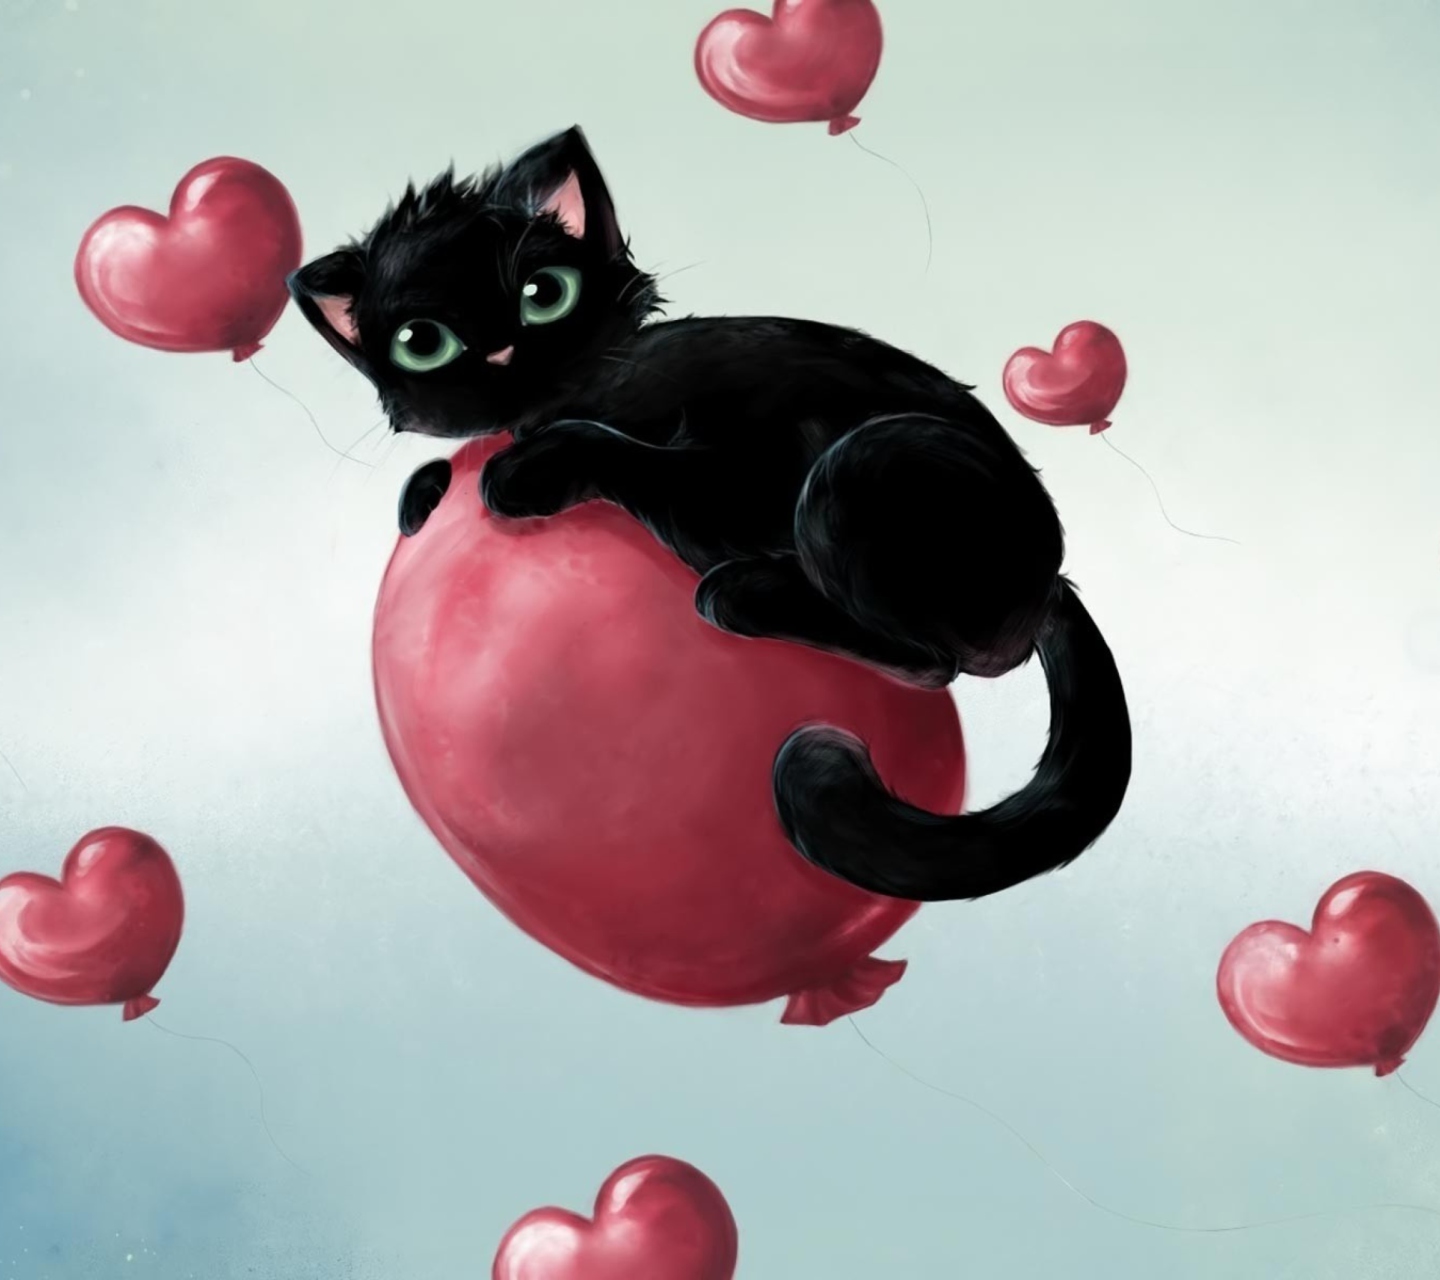 Das Black Kitty And Red Heart Balloons Wallpaper 1440x1280